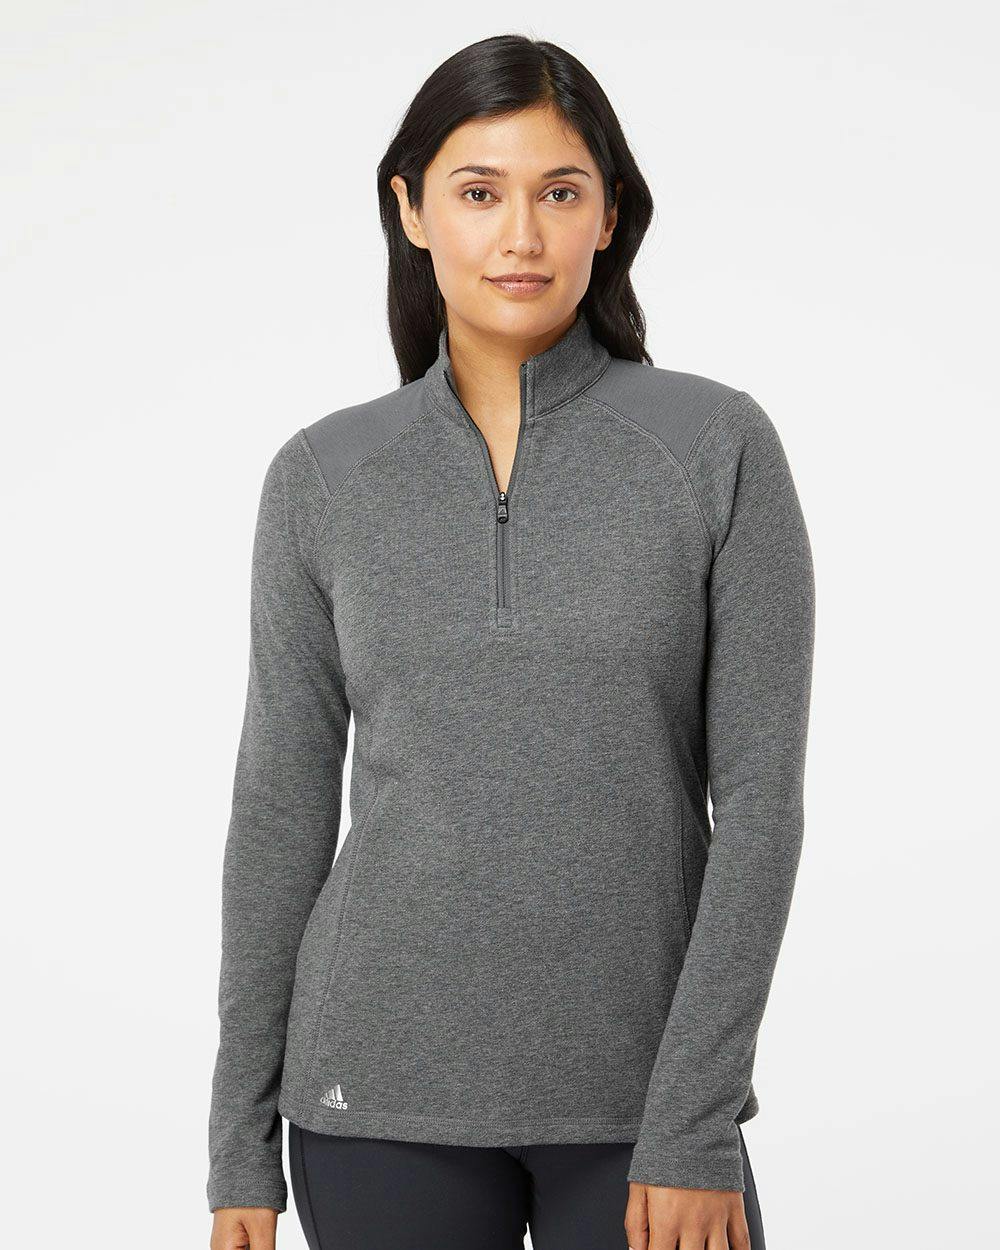 Image for Women's Heathered Quarter-Zip Pullover with Colorblocked Shoulders - A464